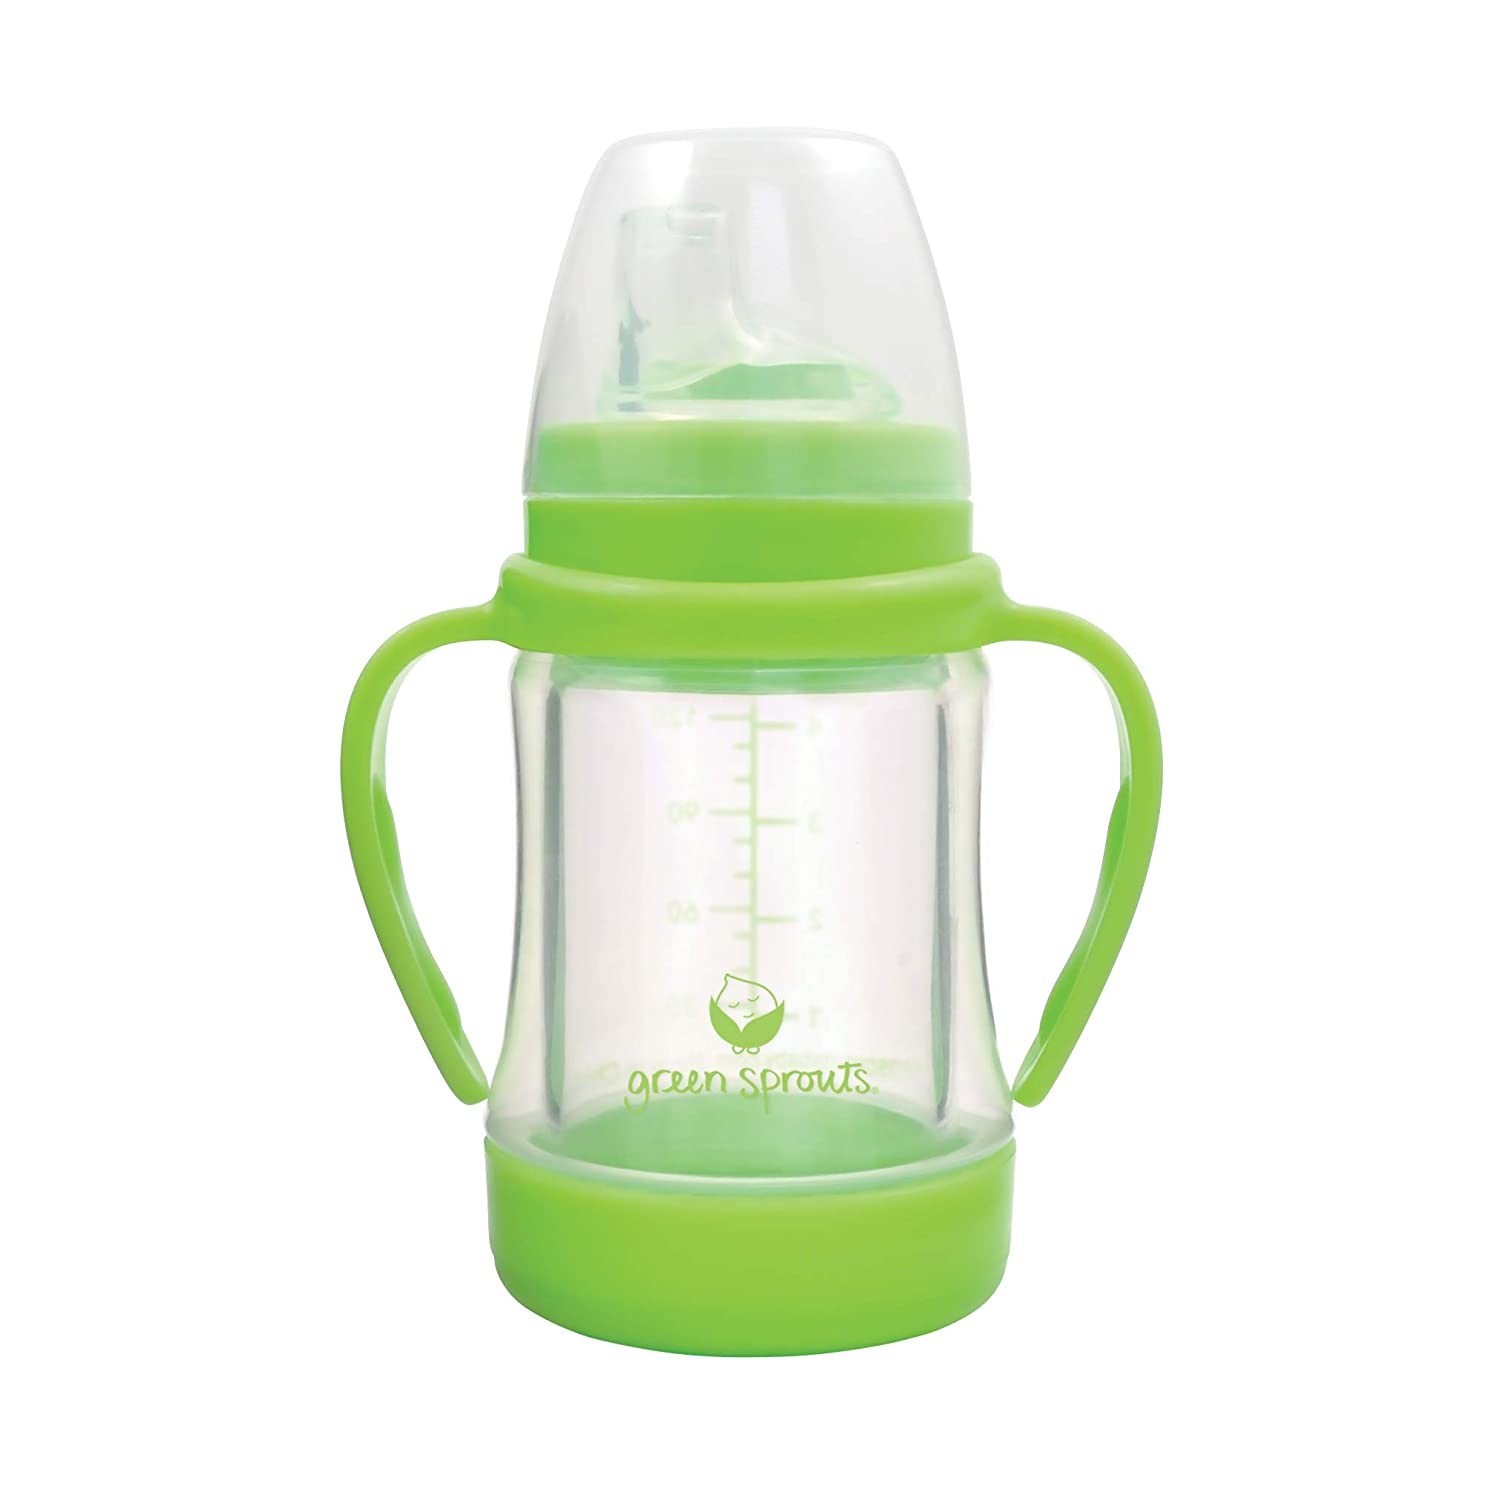 Green Sprouts Sippy Cup